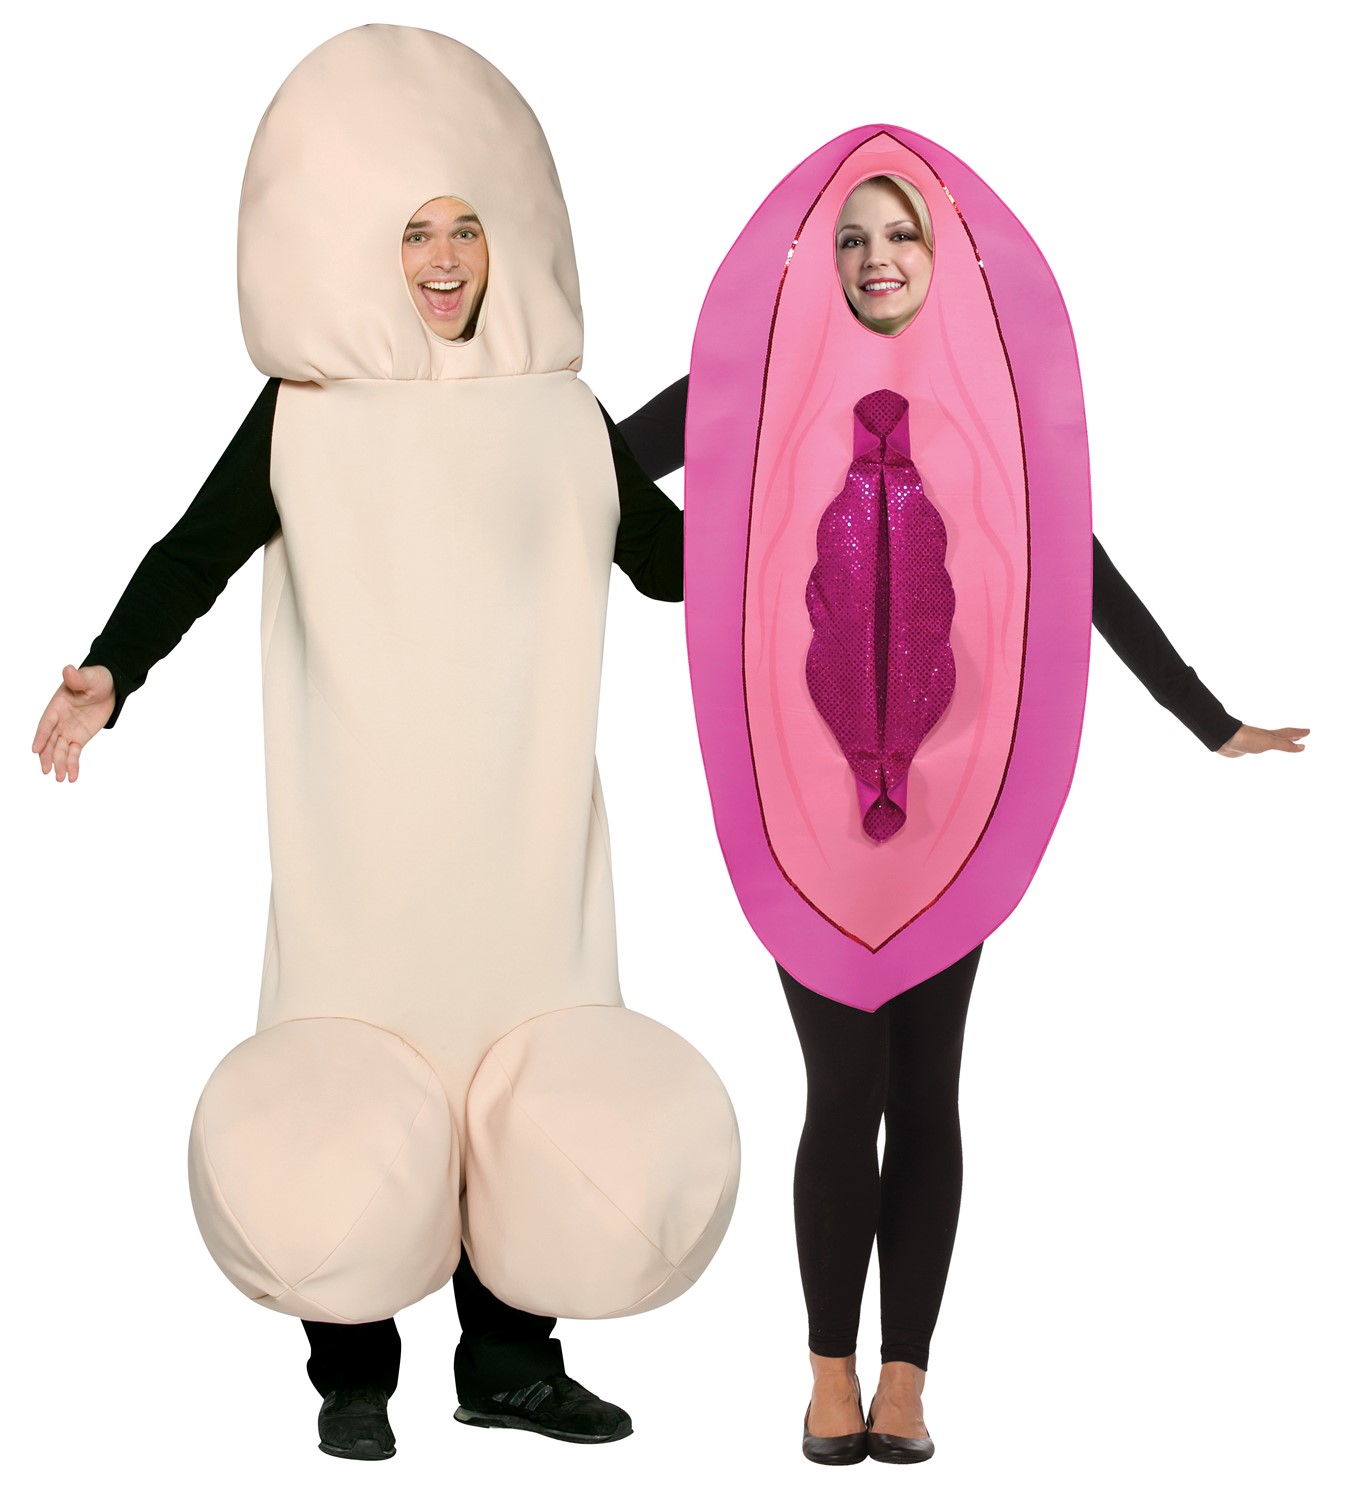 Adult x rated halloween costumes